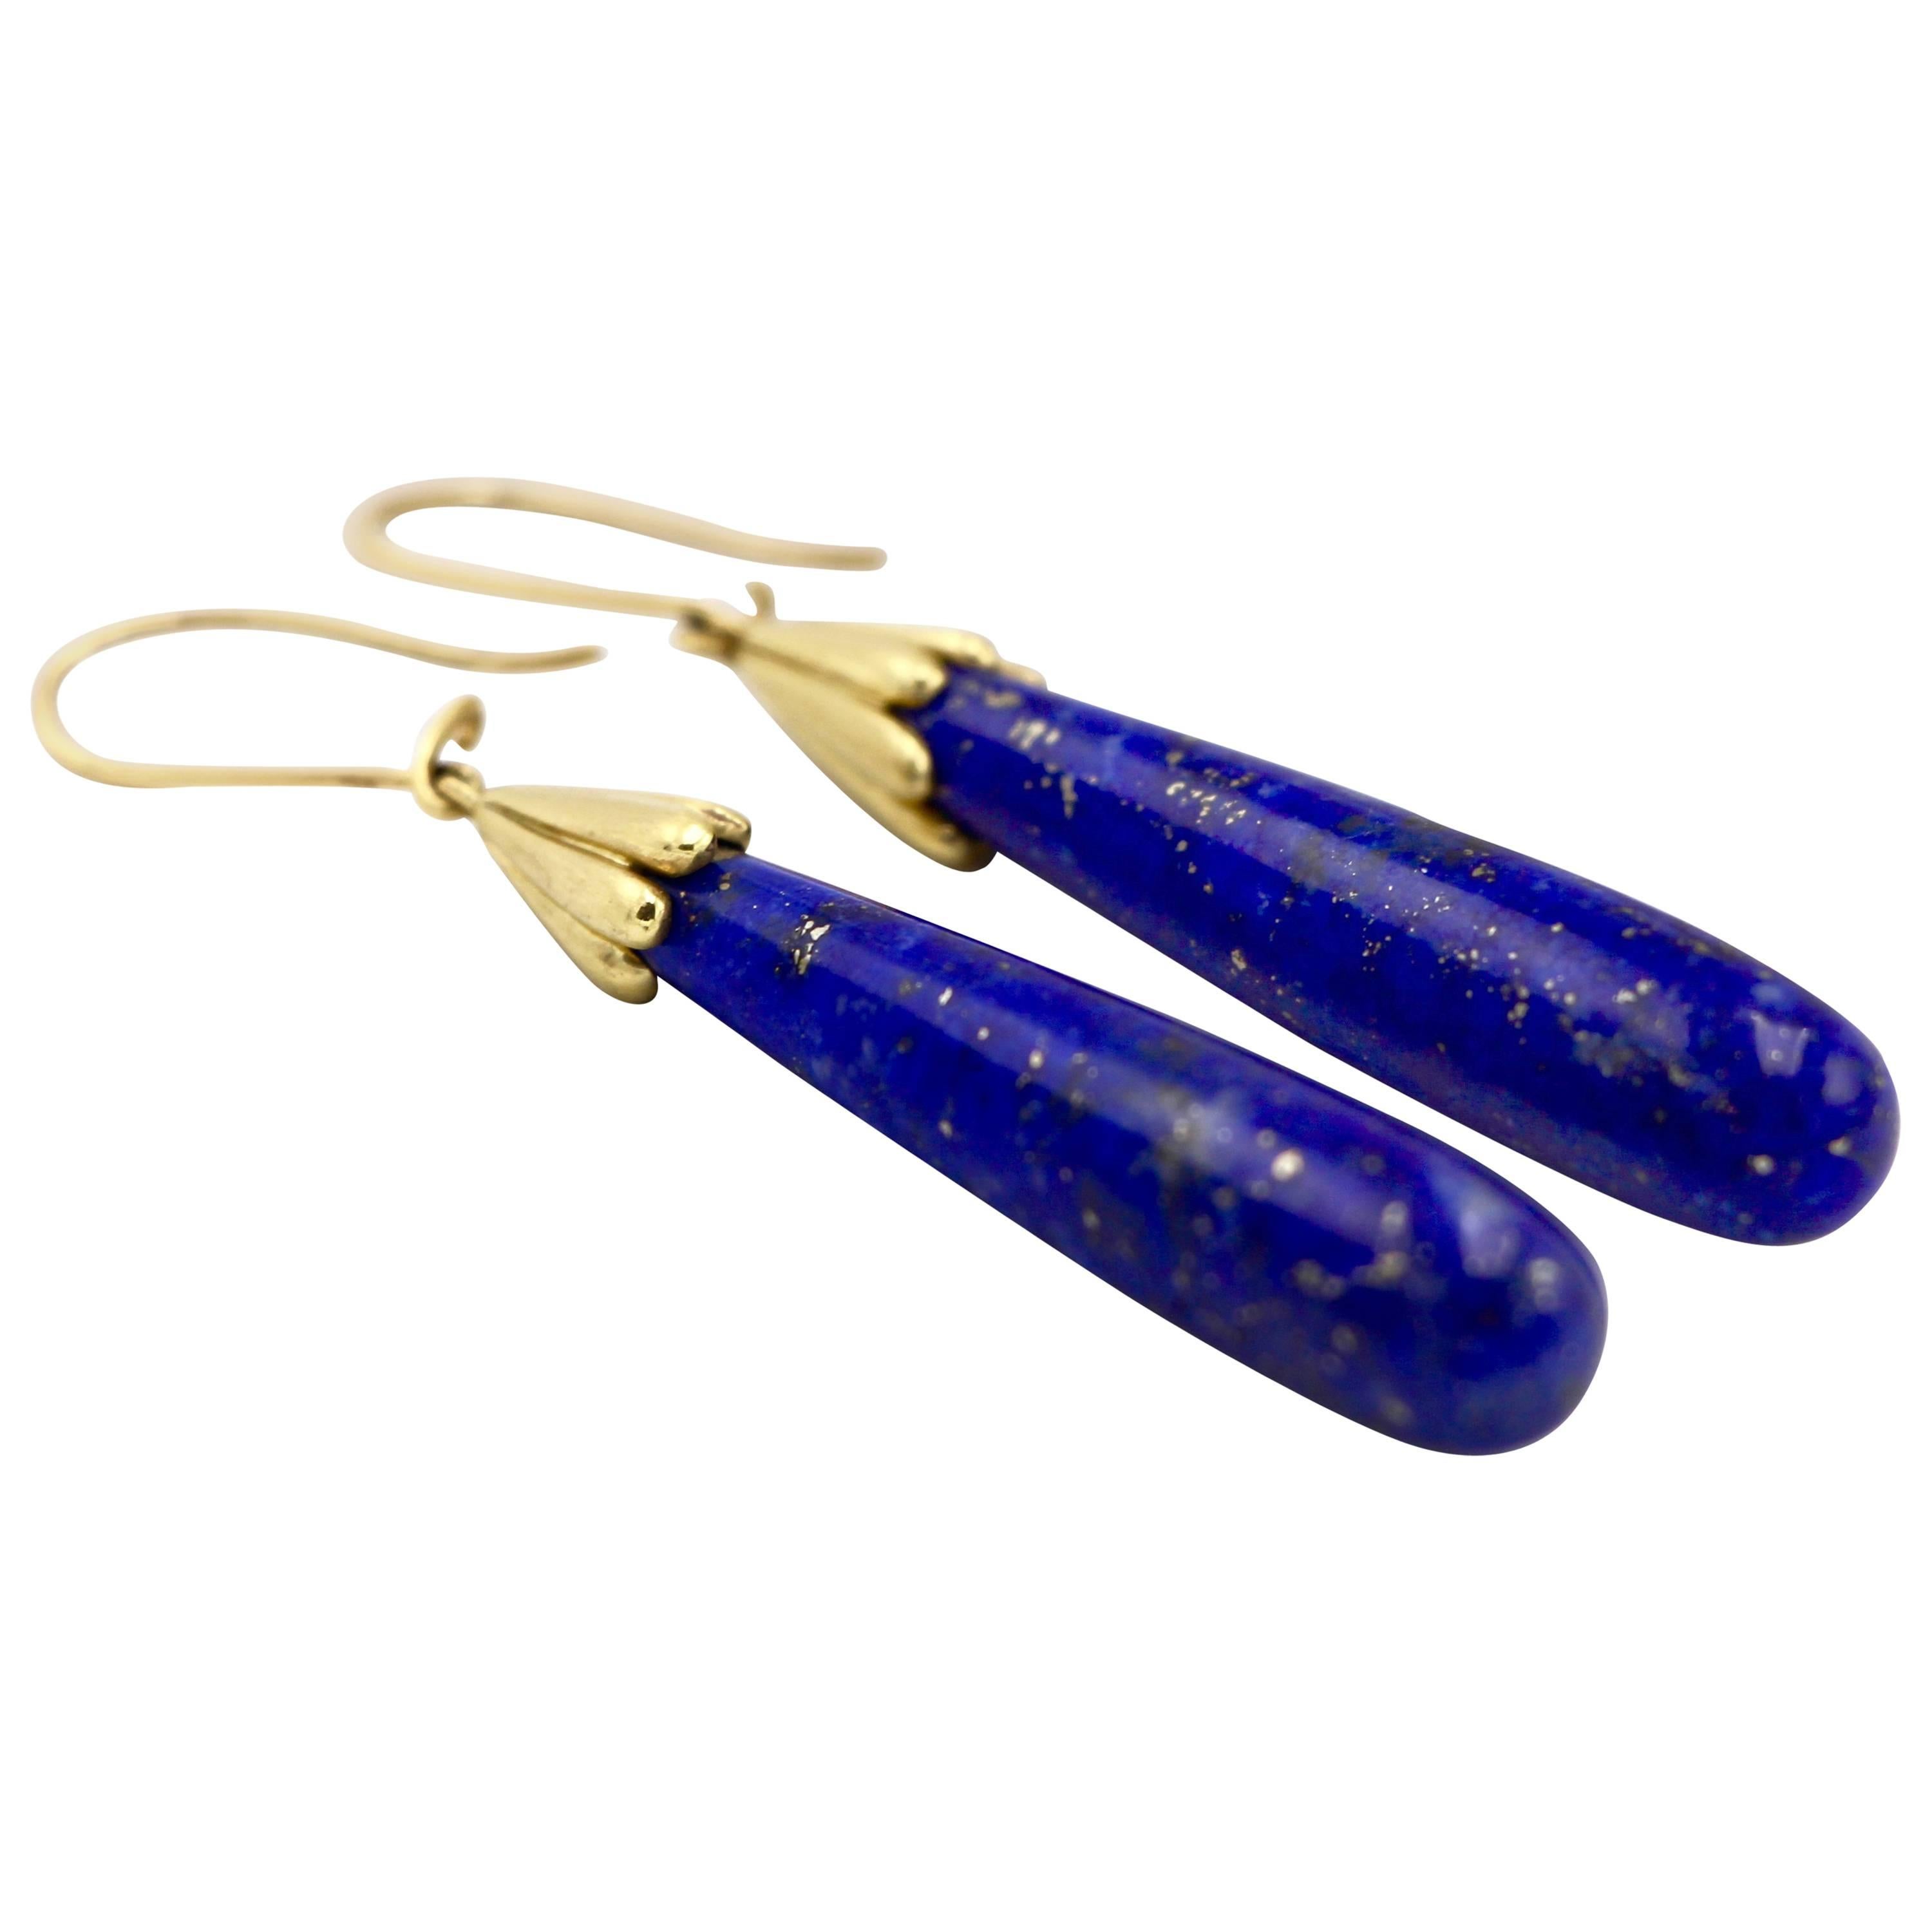 These stunning, deep blue Lapis Lazuli (95 Carat) petals, set in 18 Karat Gold, are a long sought-after and admired stone. Simply elegant.

